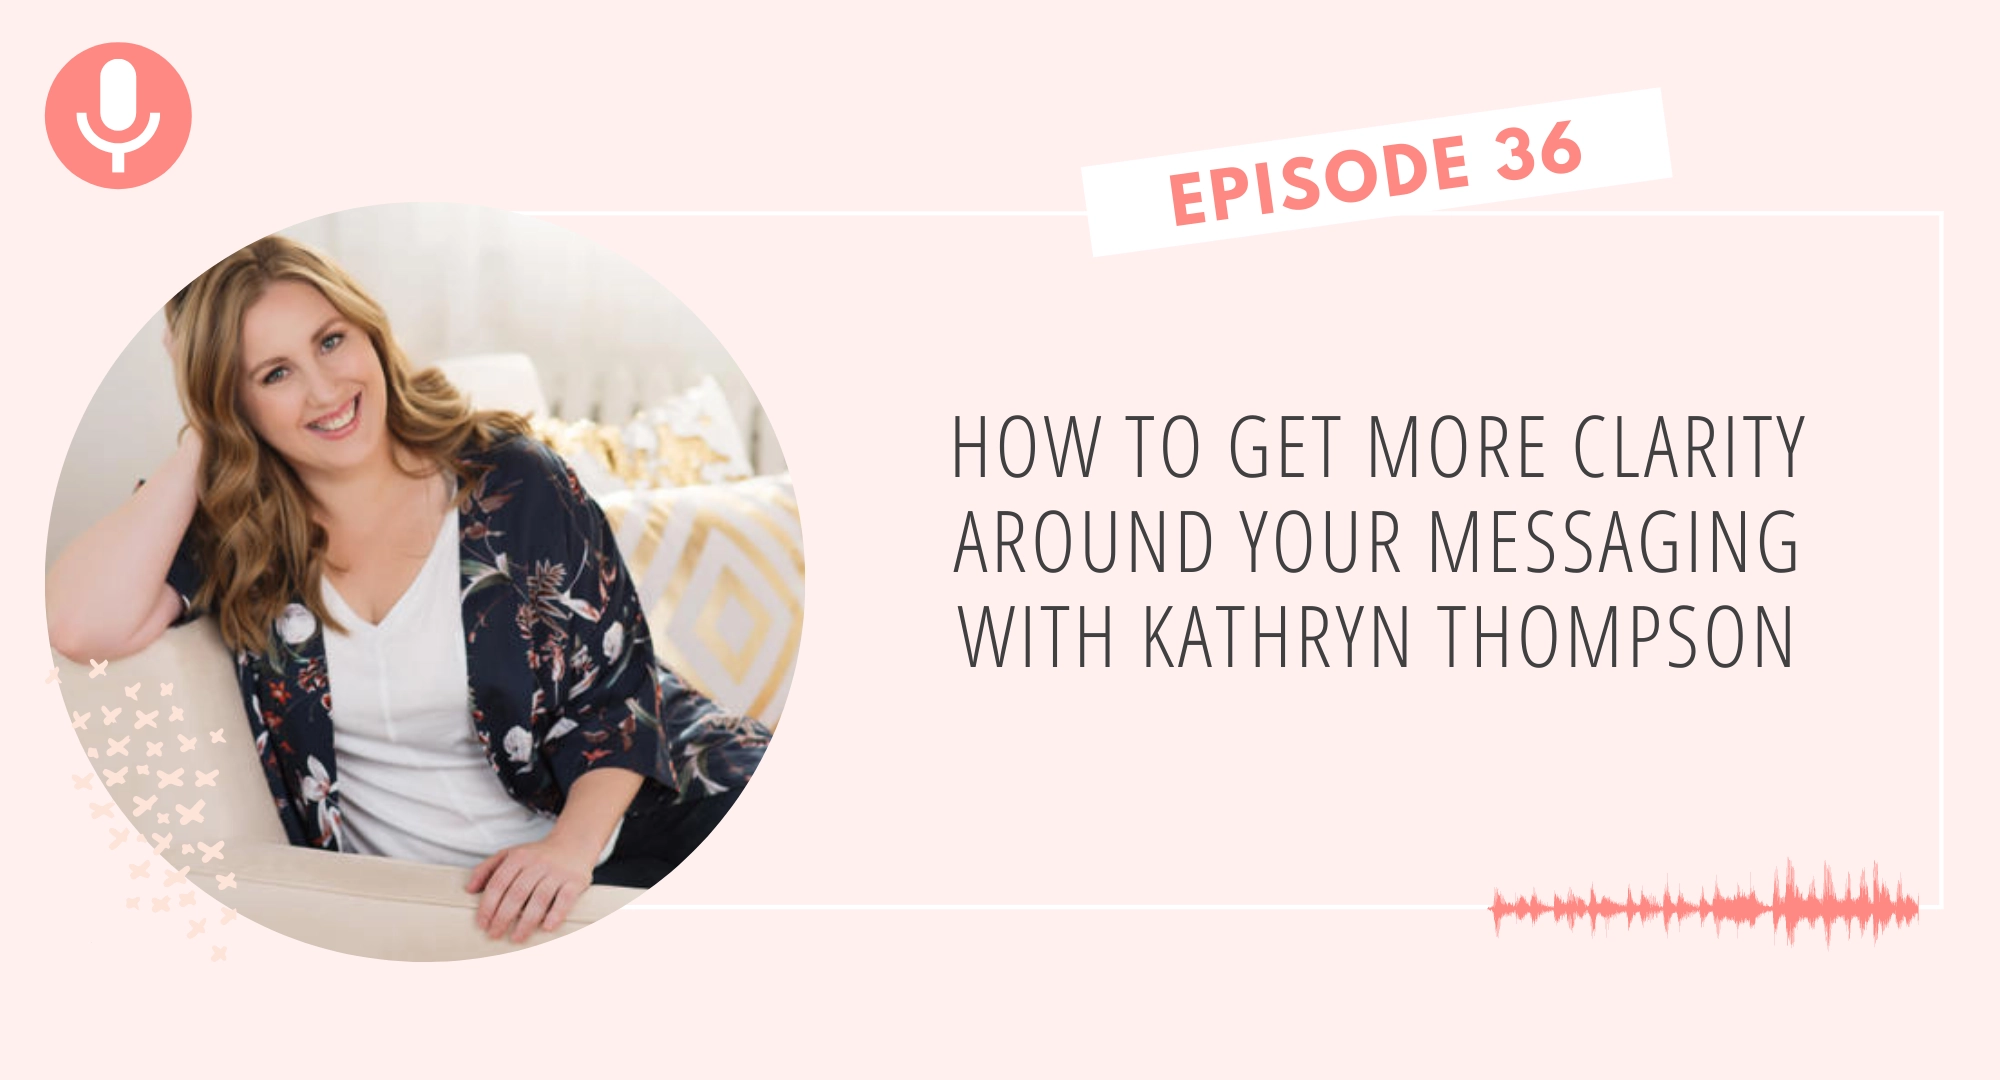 How to Get More Clarity Around Your Messaging with Kathryn Thompson